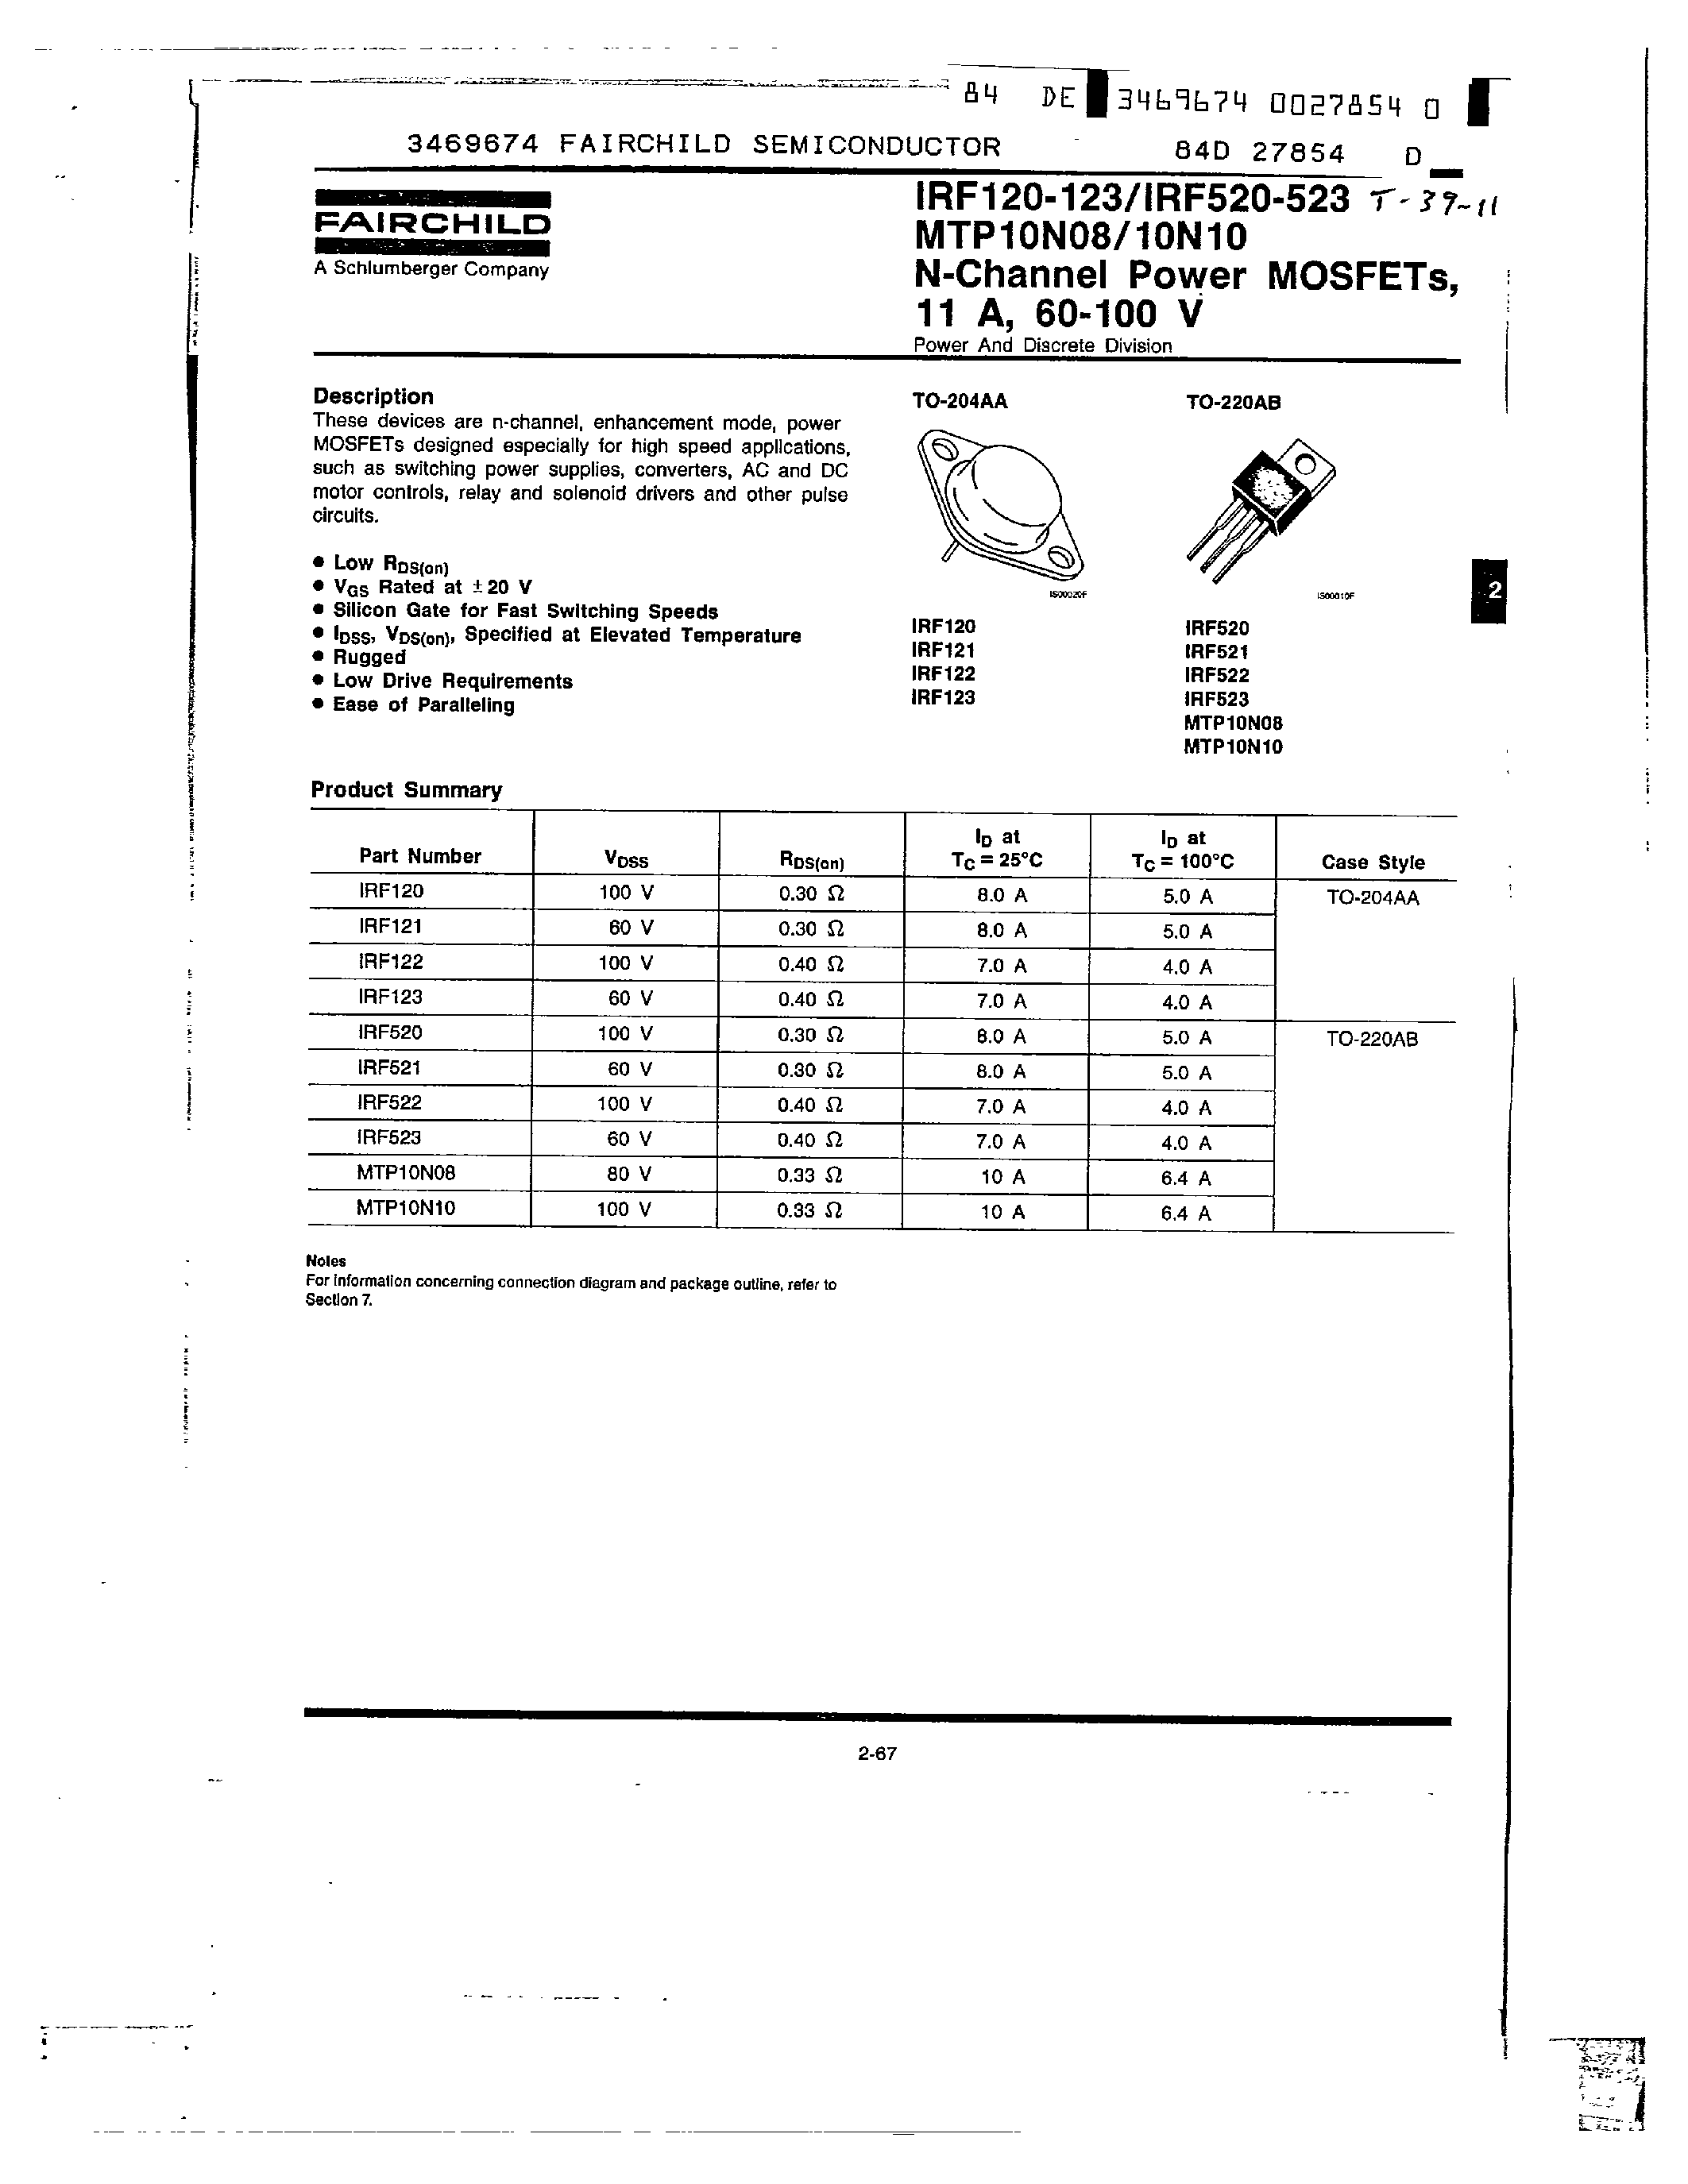 Datasheet IRF121 - N-Channel Power MOSFETs/ 11 A/ 60-100 V page 1